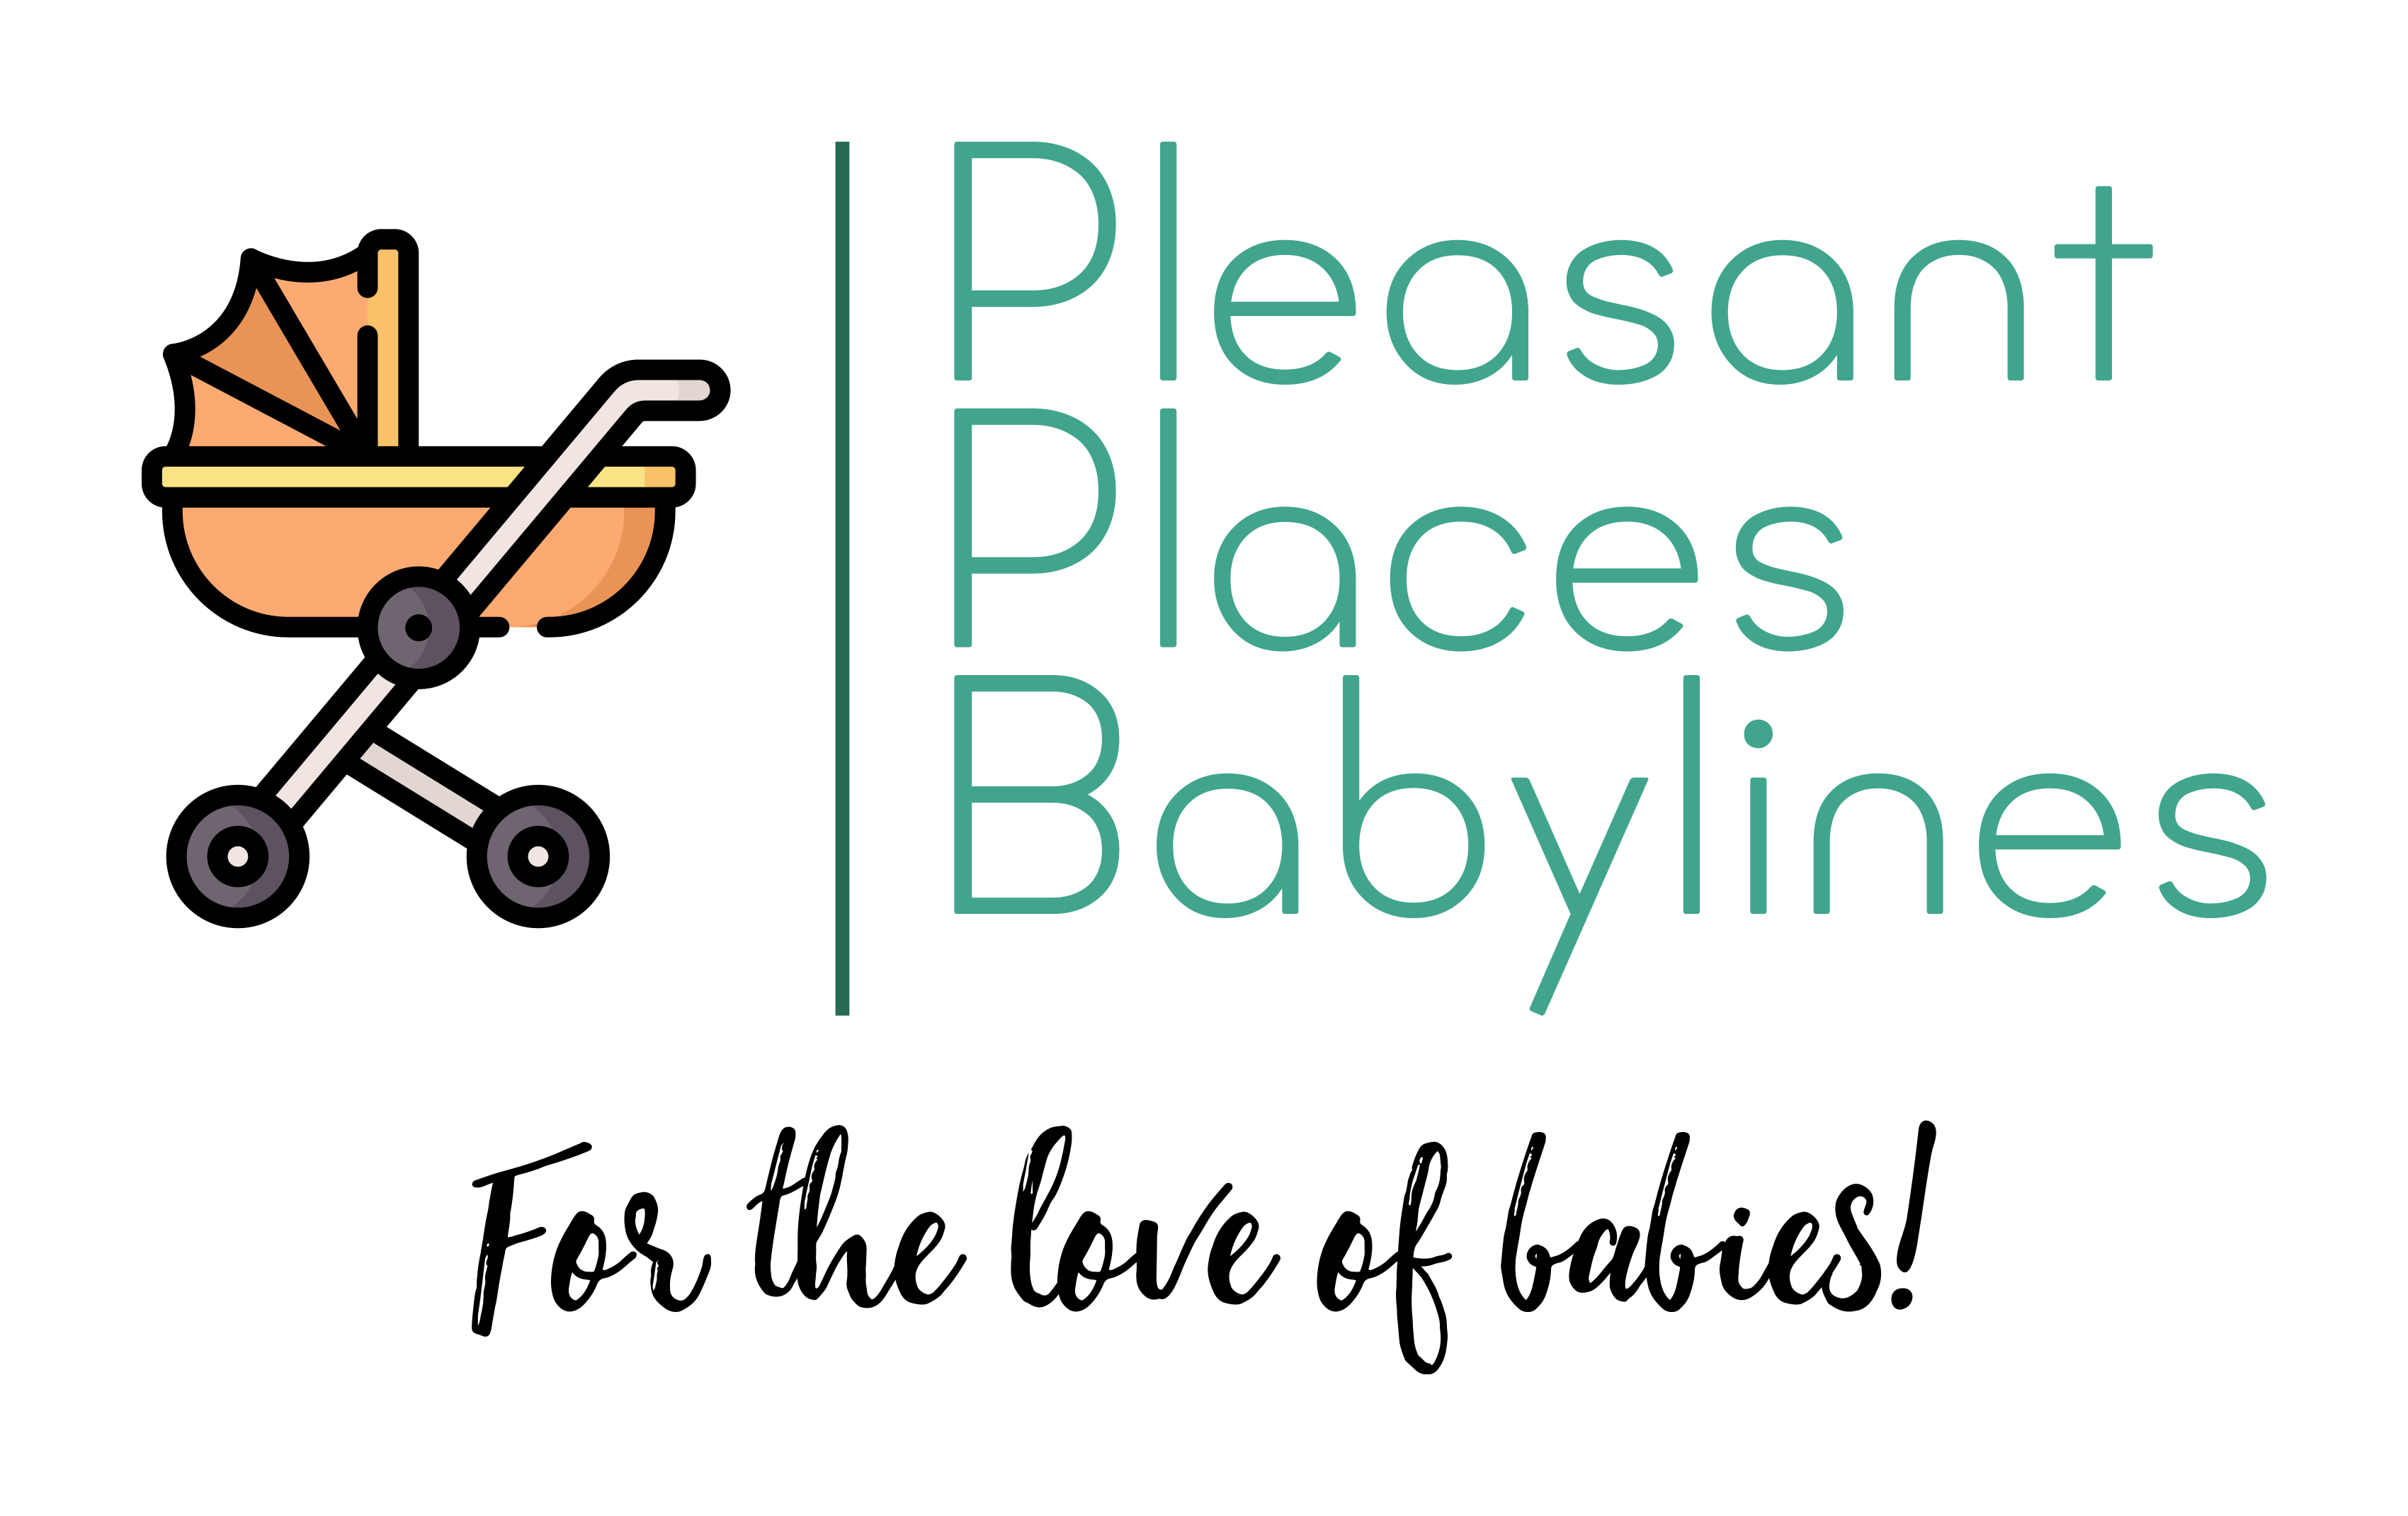 Shop with Confidence at Pleasant Places Babylines - Lagos, Nigeria's Top Baby Store